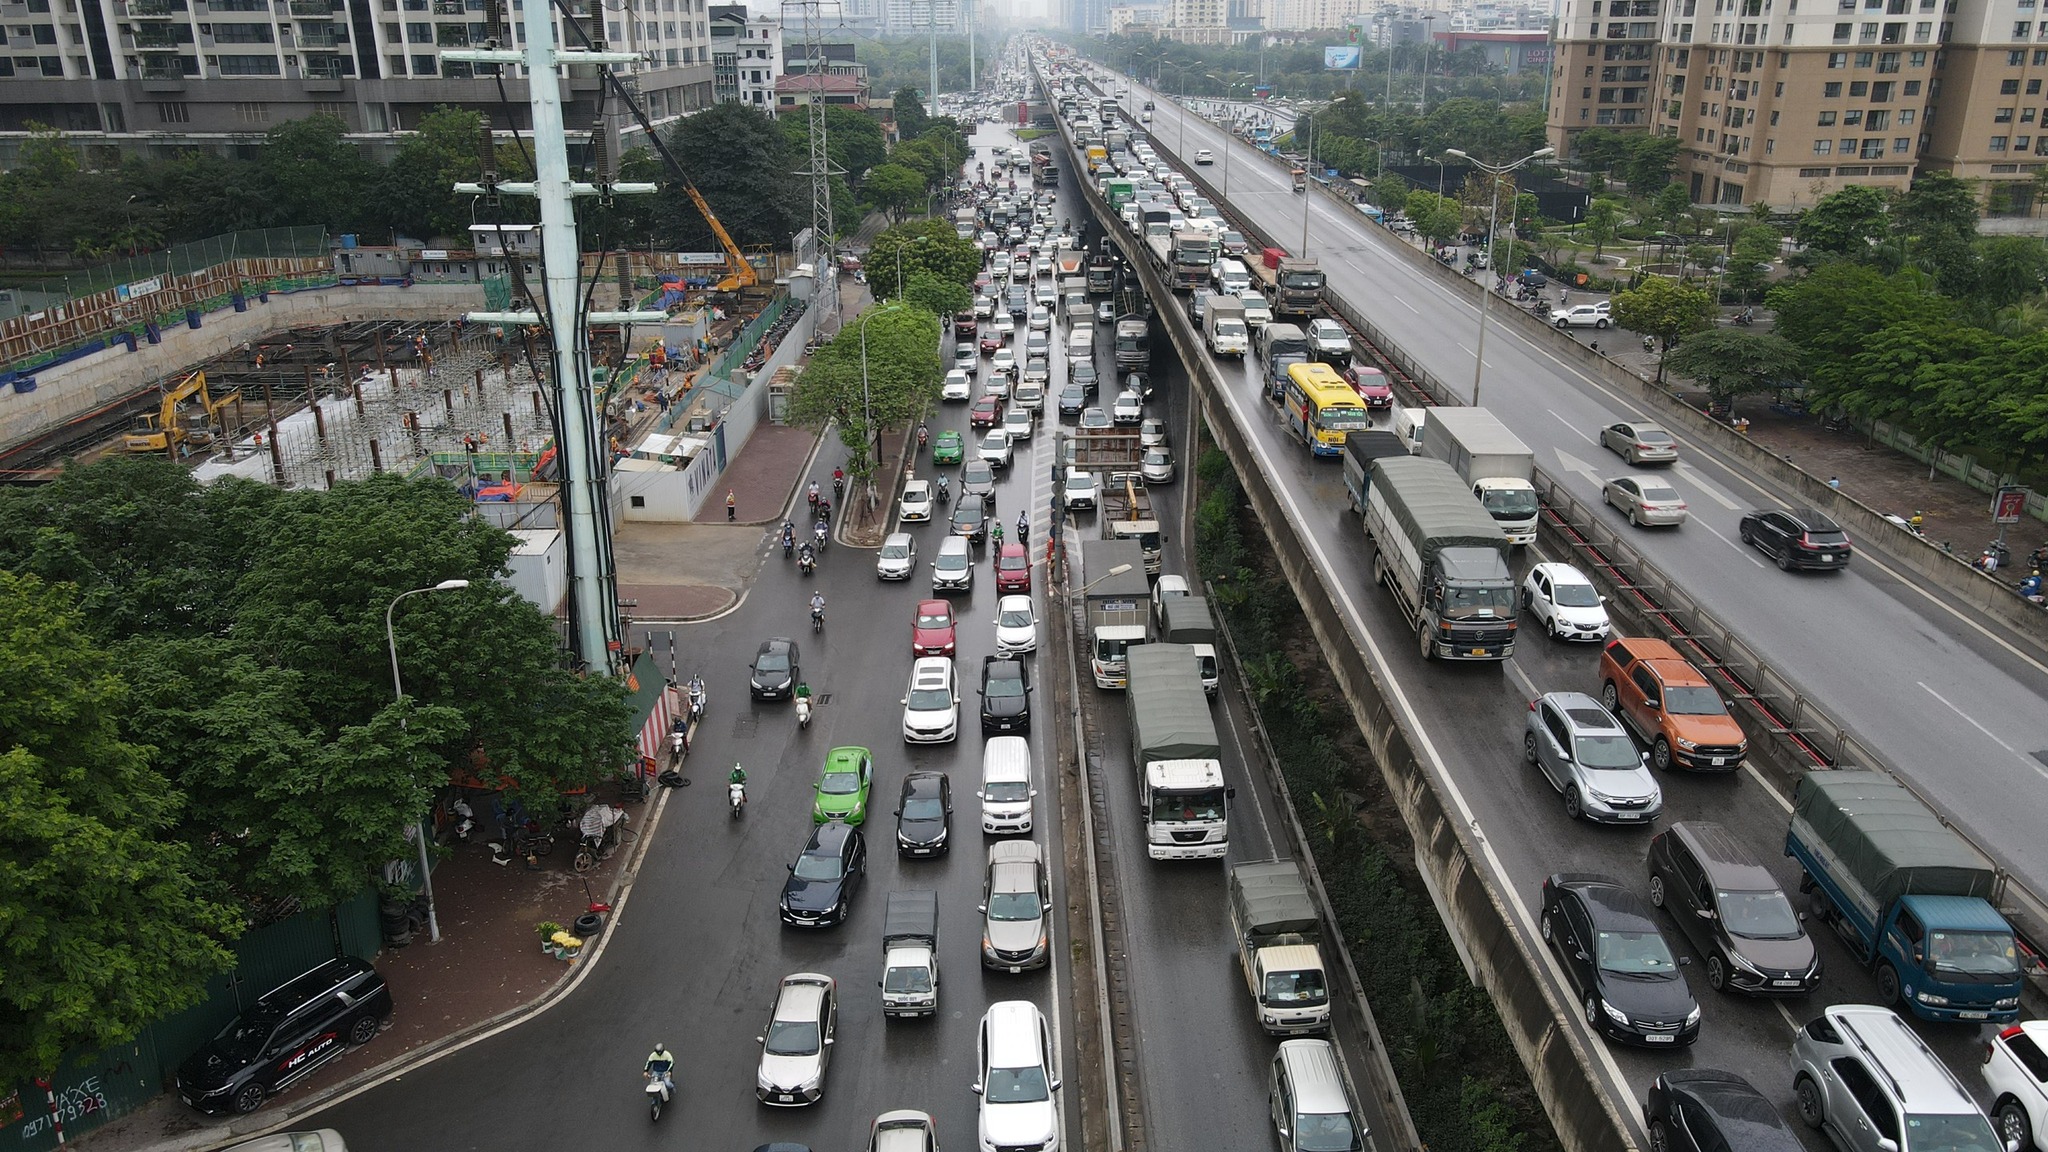 The line of cars followed each other back to their hometown for the holidays of April 30 and May 1, the streets of the capital were congested - April 13